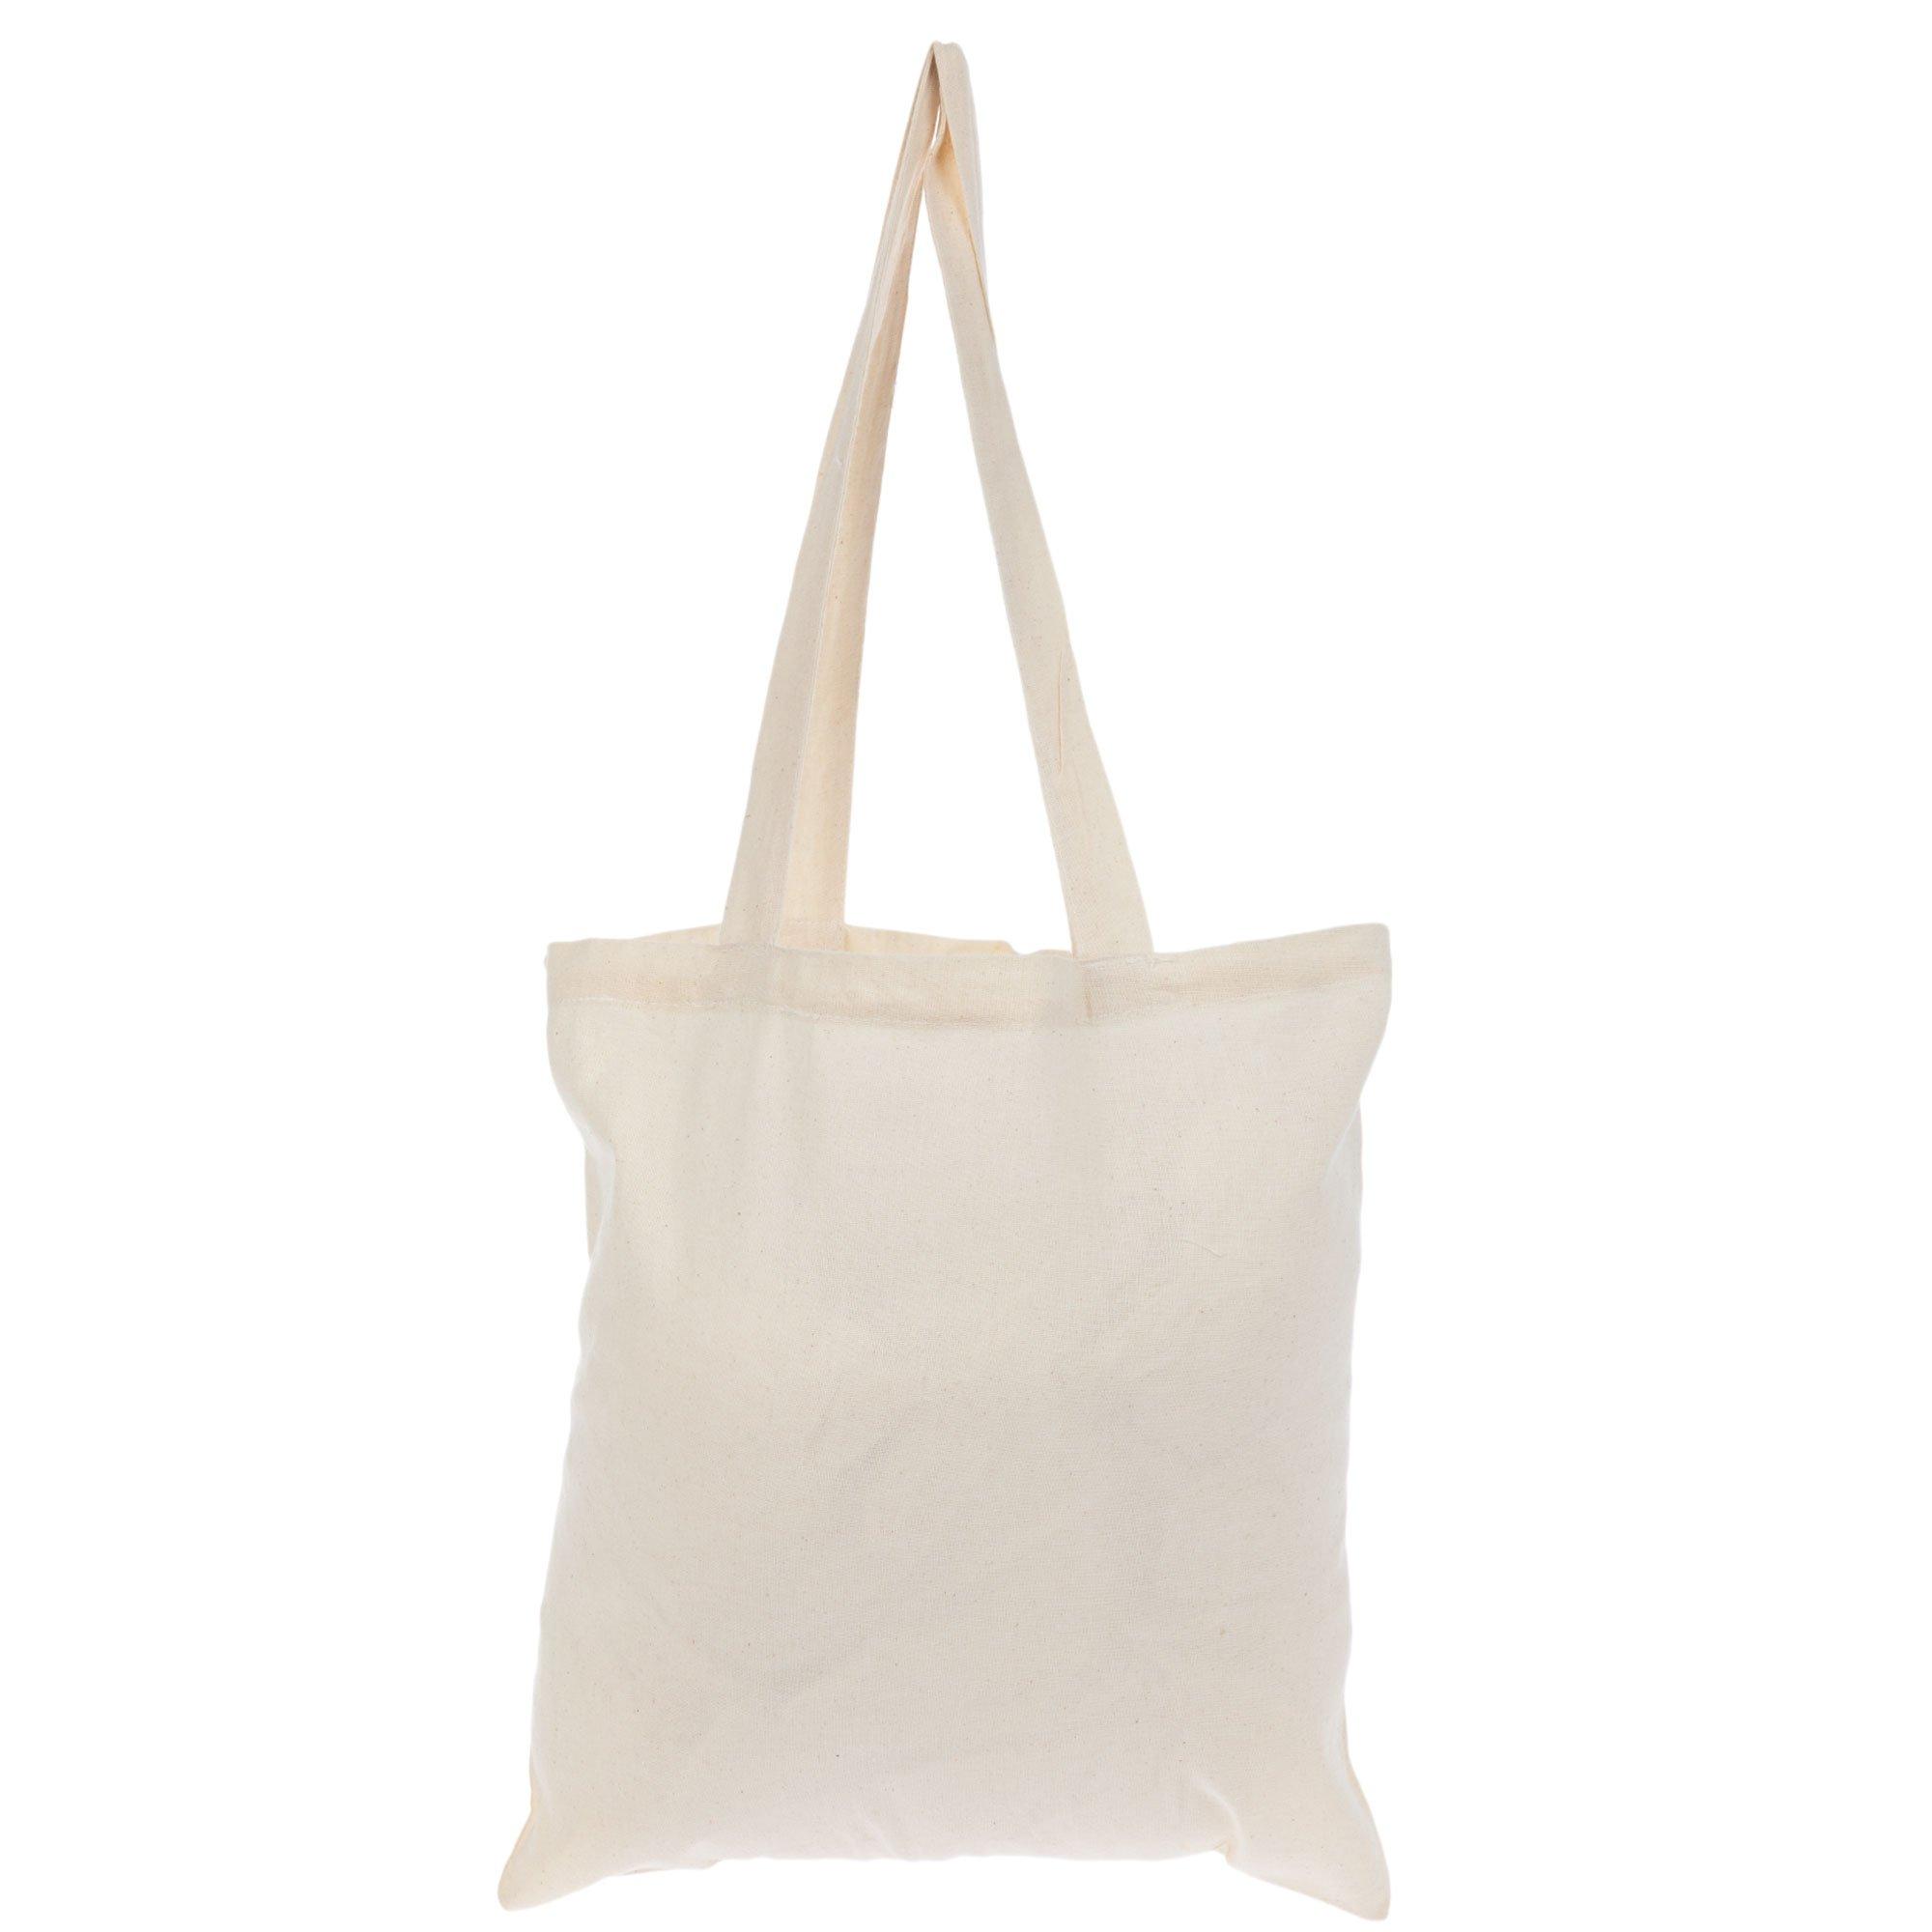 Hello Hobby Large Canvas Tote Bag with Strap - White - 13.5 x 13.5 x 3.5 in